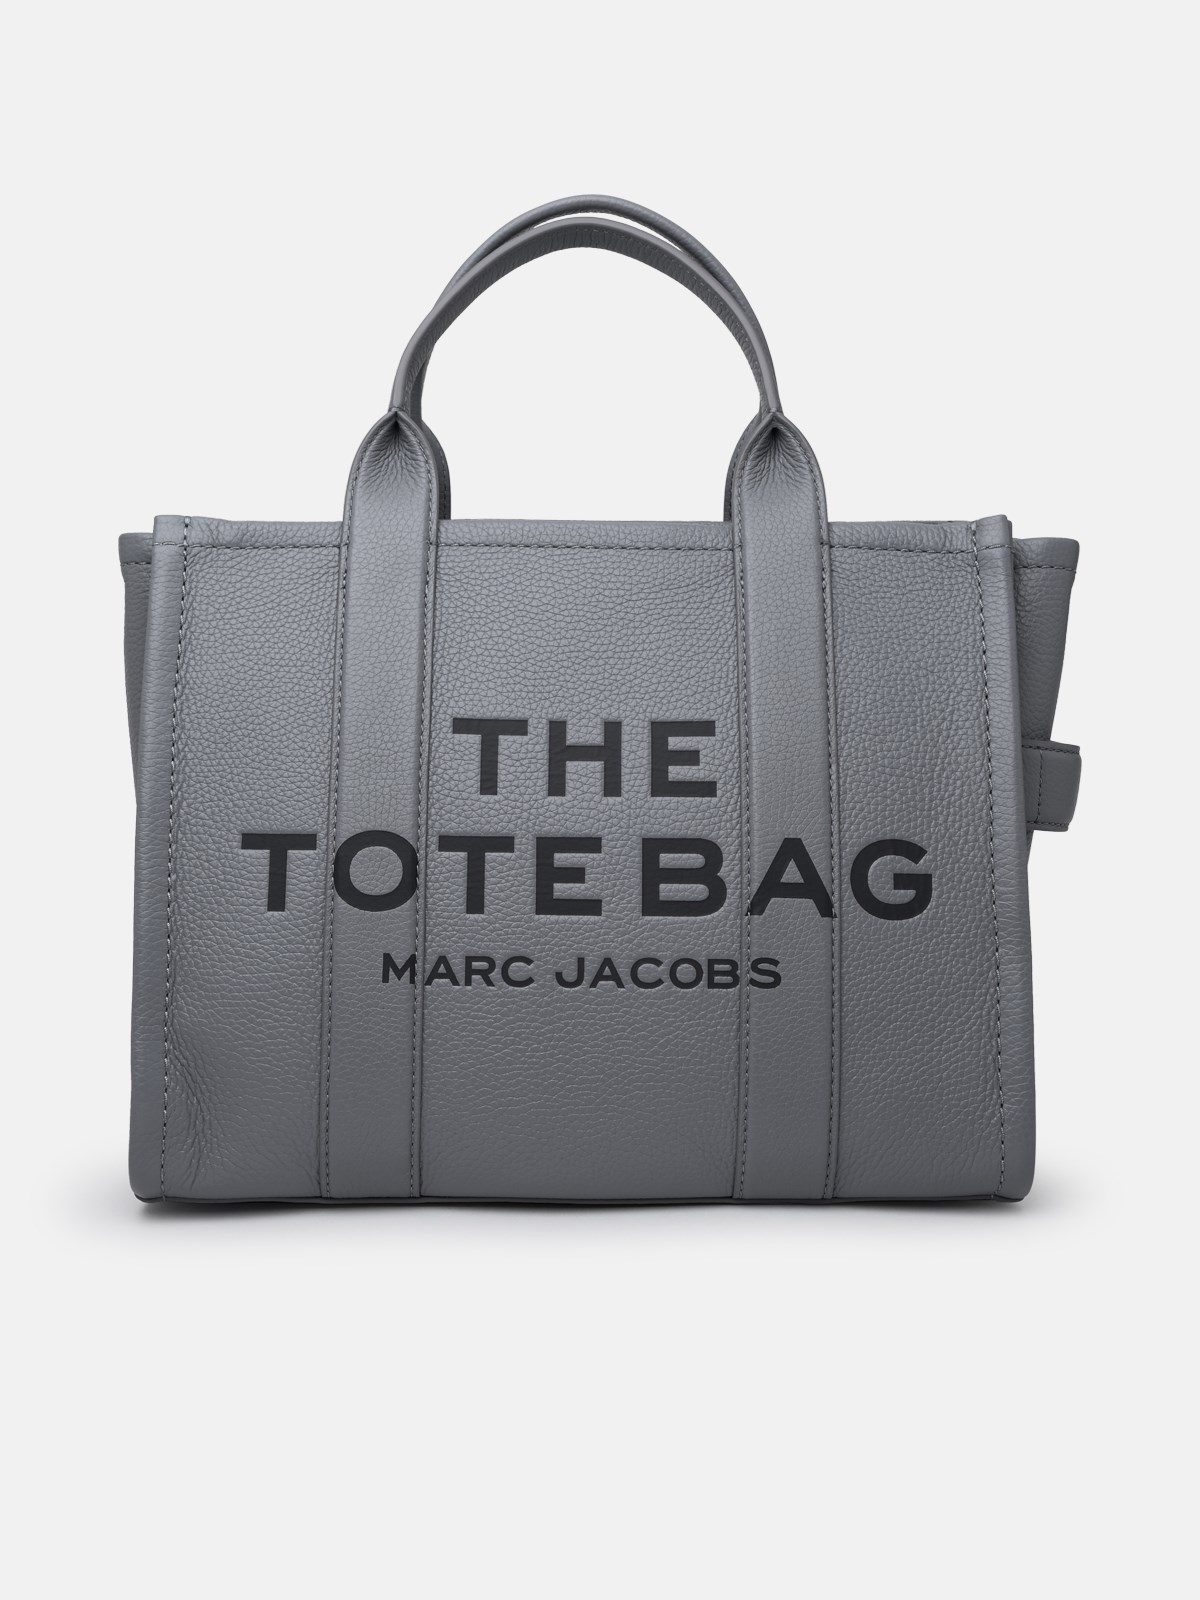 Marc Jacobs (the) Gray Leather Midi Tote Bag In Grey